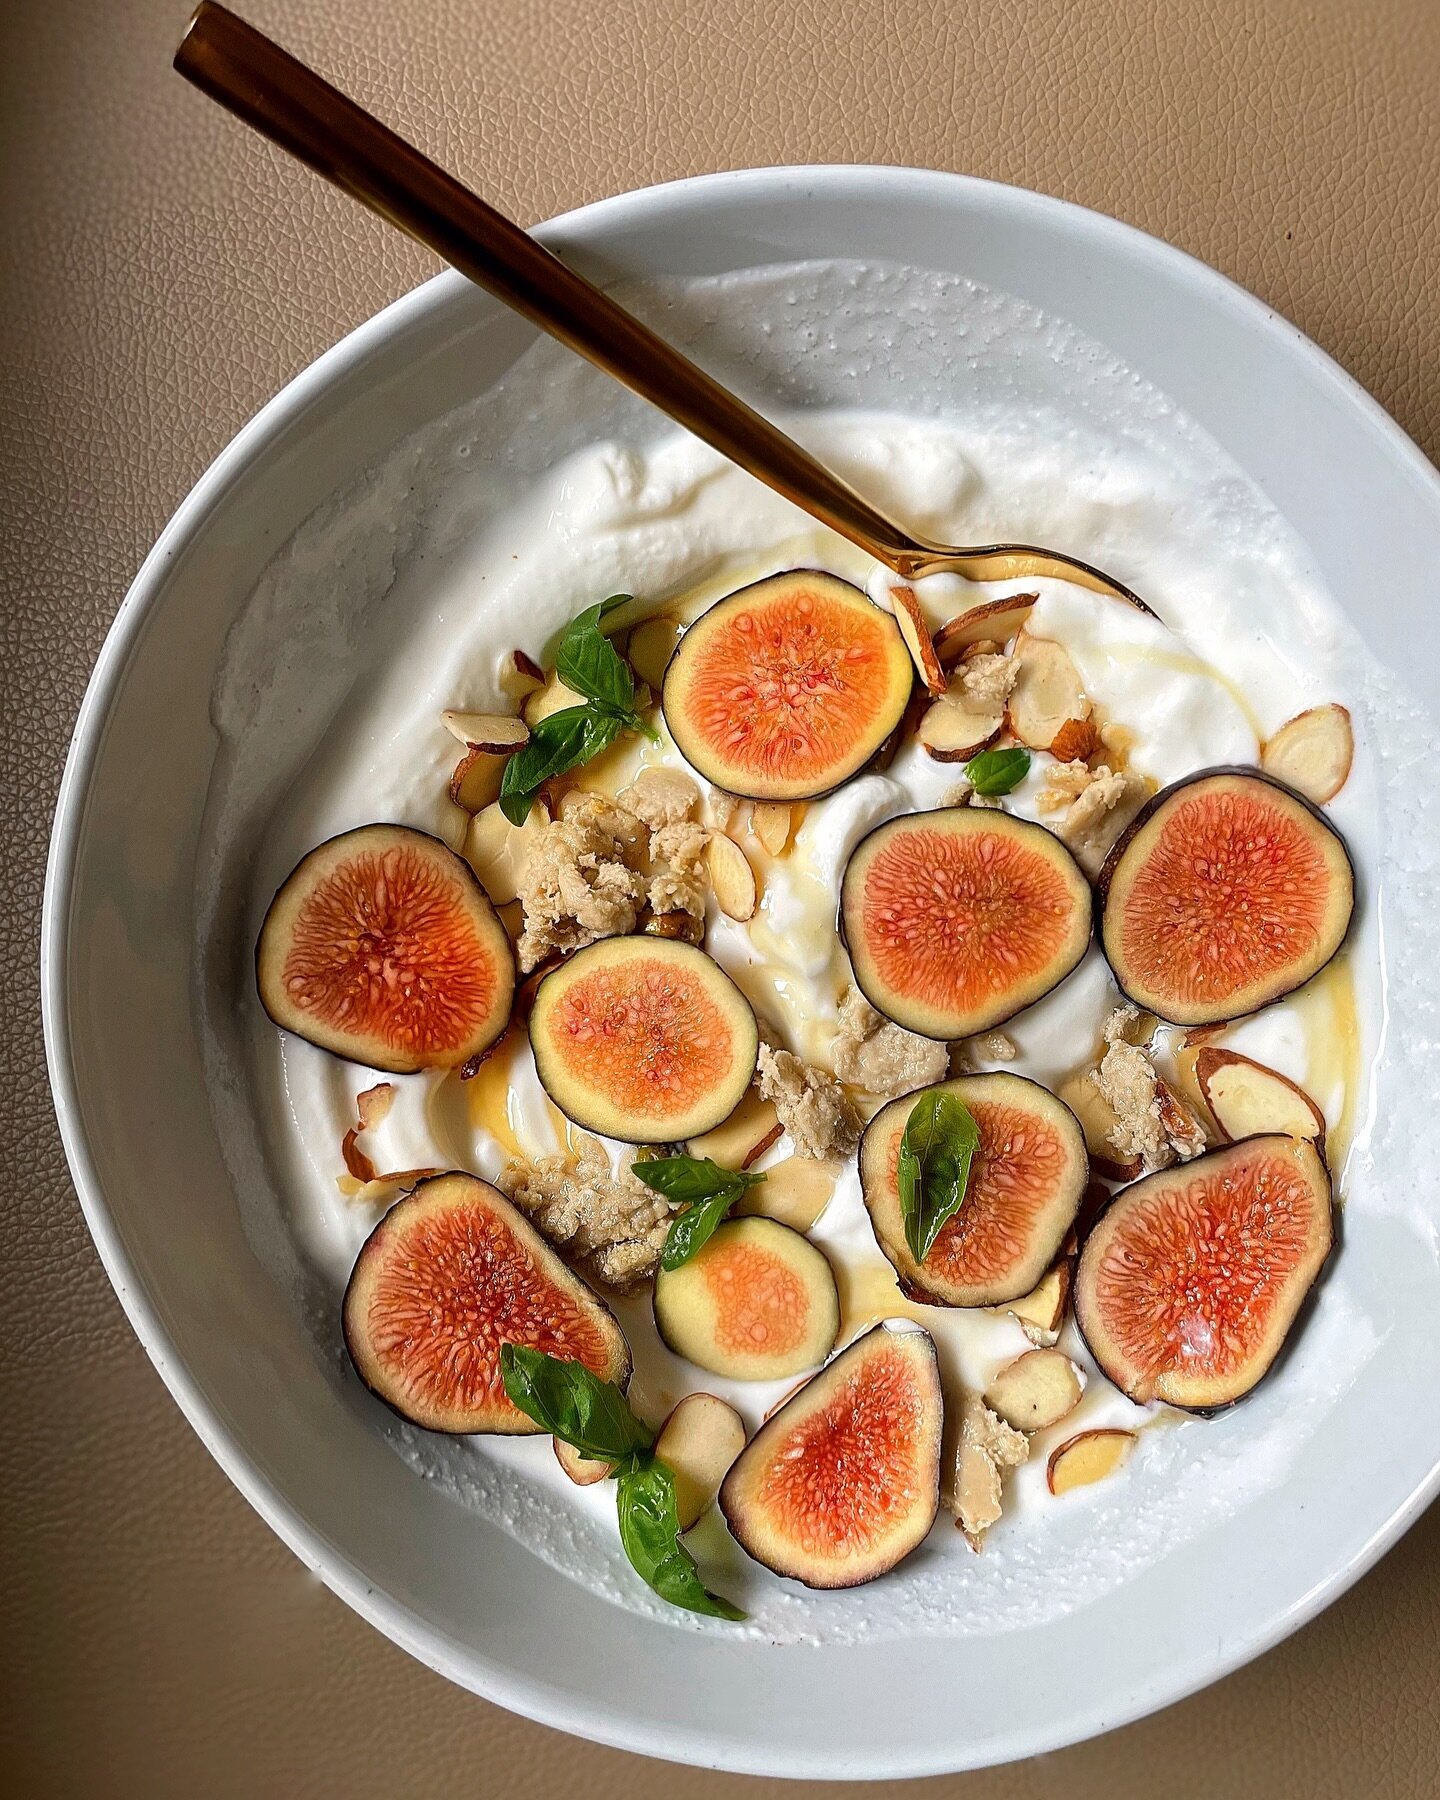 A quick love affair with today&rsquo;s breakfast. I stopped and paused and enjoyed this moment. I FIGured you may too! 

Today&rsquo;s Yogurt Bowl
Low Fat Greek Yogurt
Clover Honey
Almond Slices
Halva
Figs

#CoffeeAndChampagneKitchen